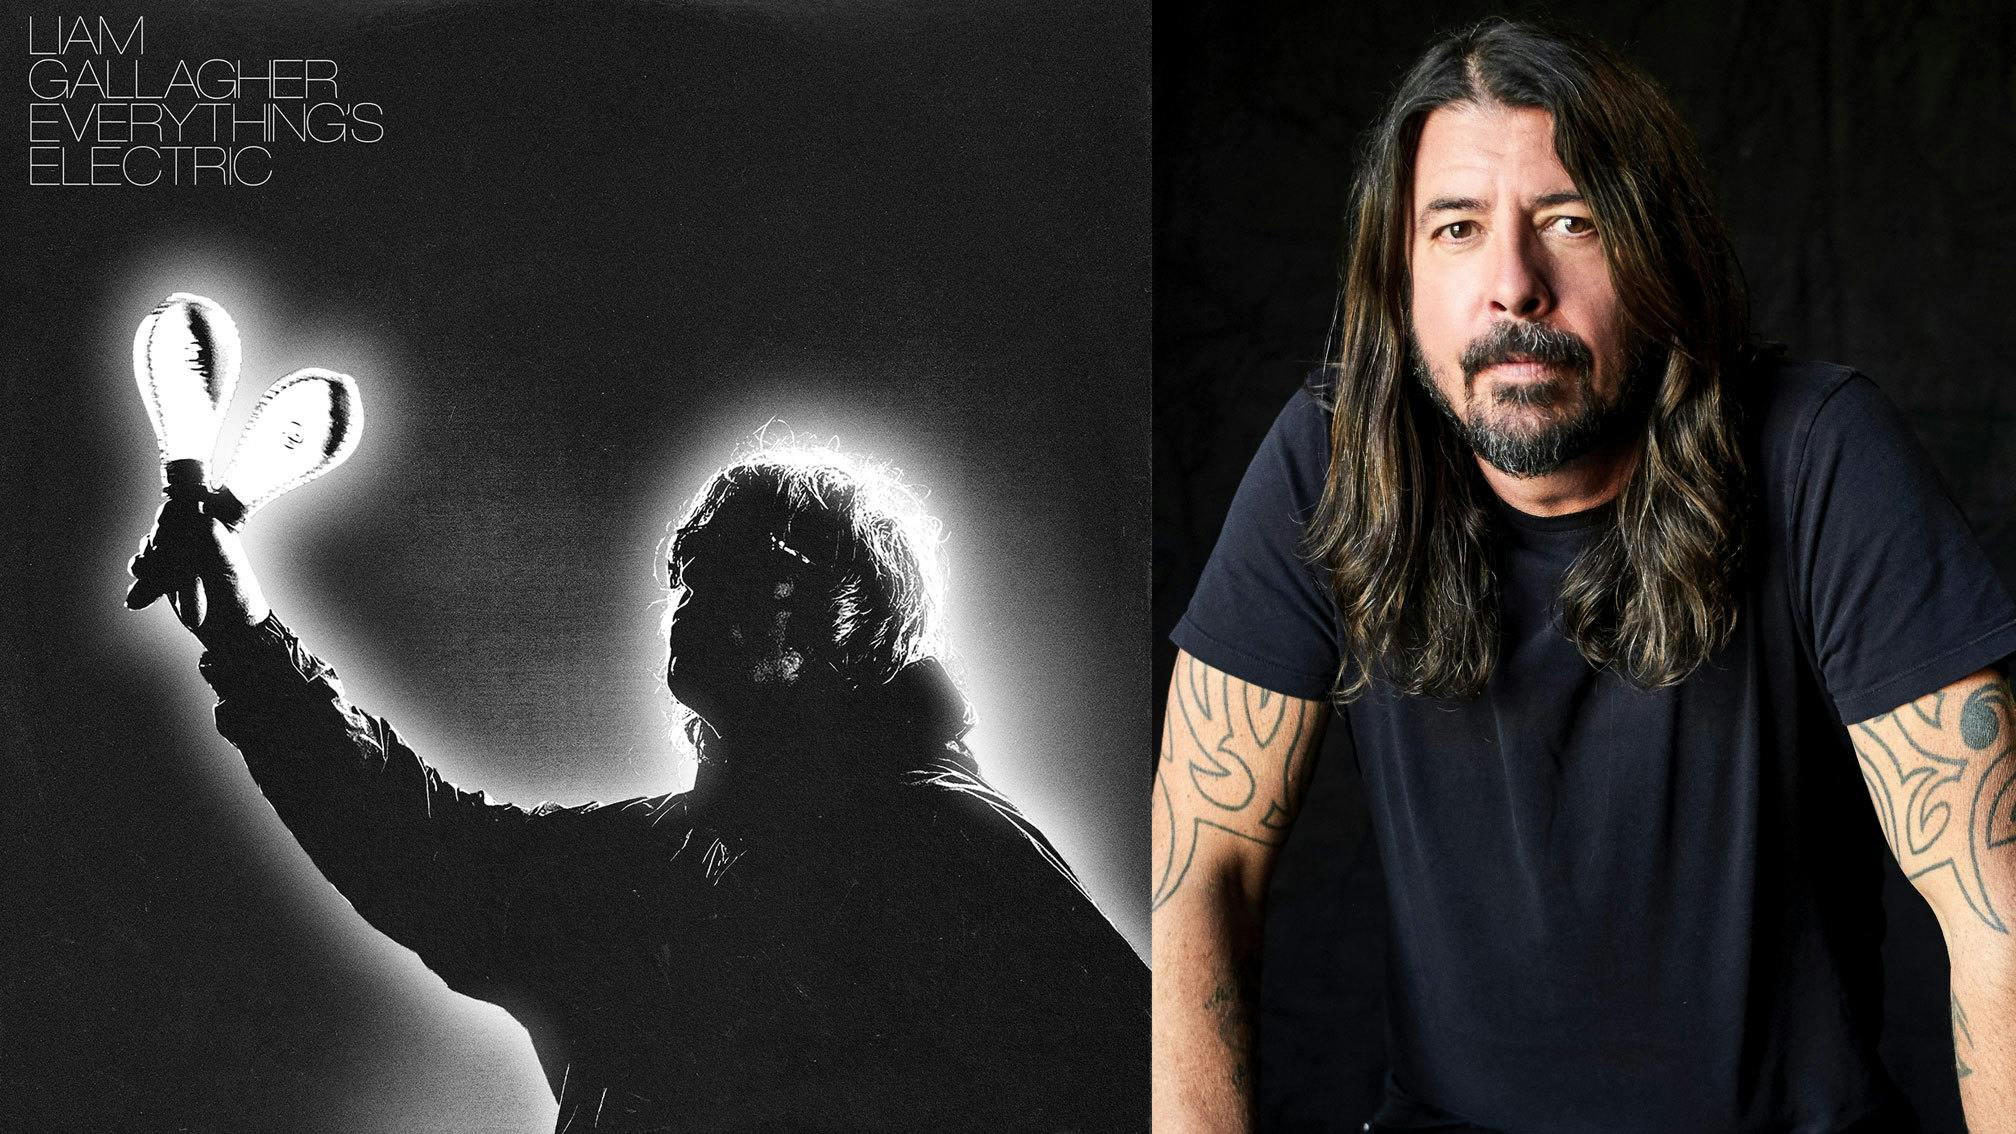 Liam Gallagher teams up with Dave Grohl for new single Everything’s Electric